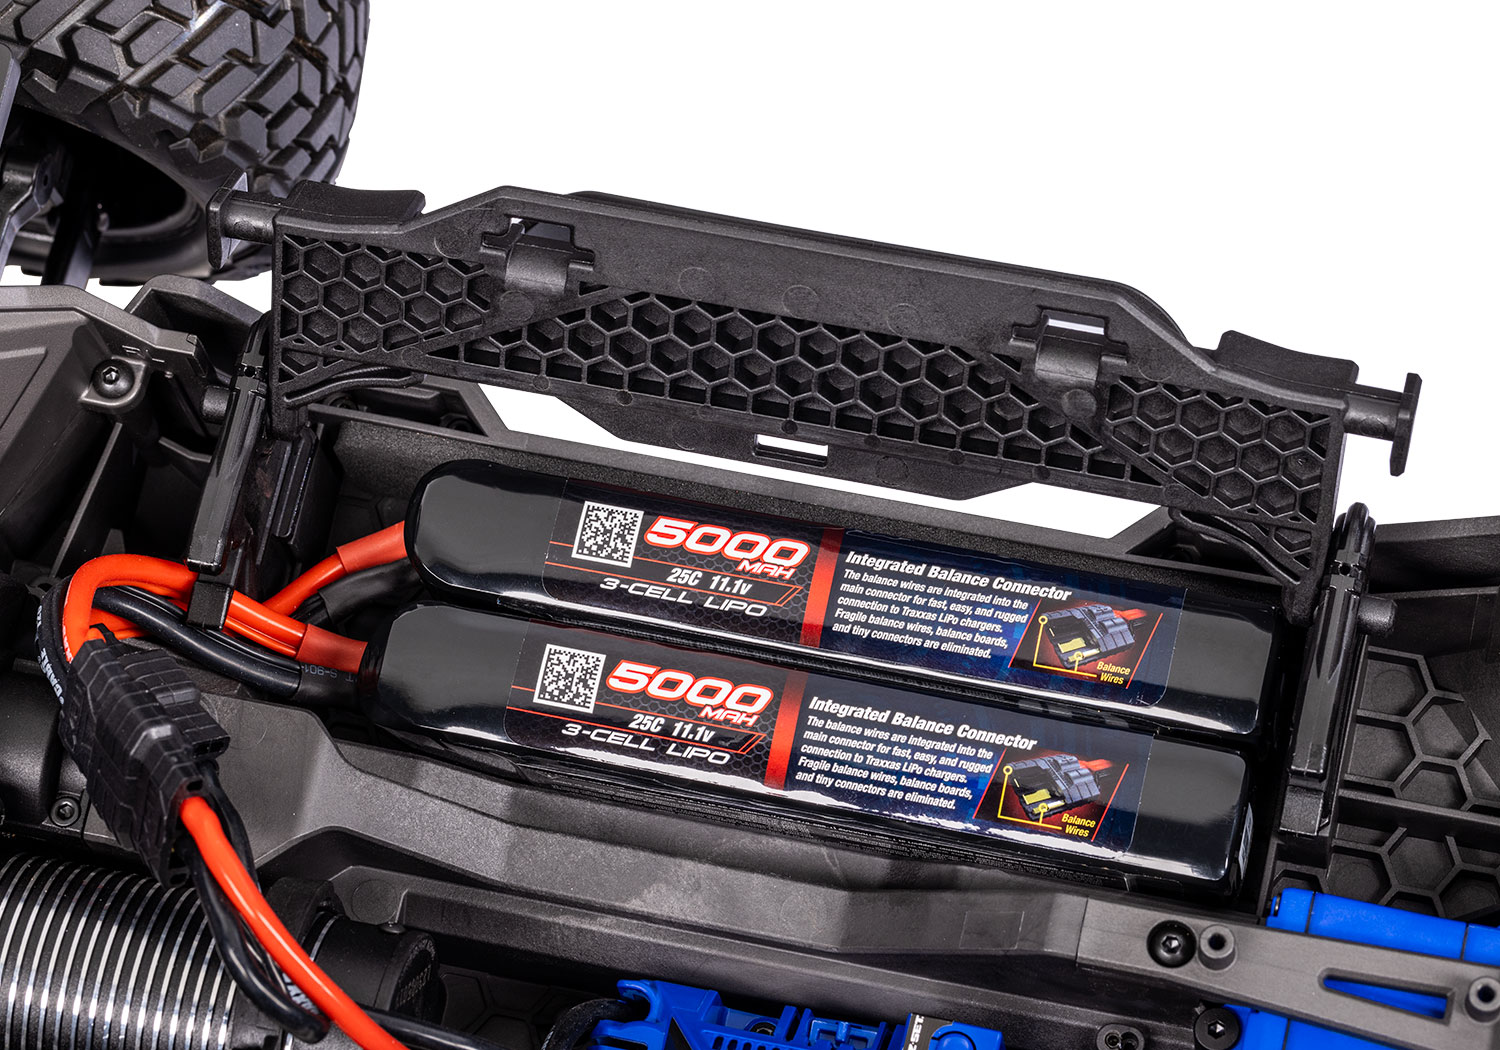 NOUVEAU PACK ECO 100% RTR MAXX SLASH ROCK N ROLL 4X4 BRUSHLESS LIPO 4S 6700 CHARGEUR TRAXXAS SAC OFFERT